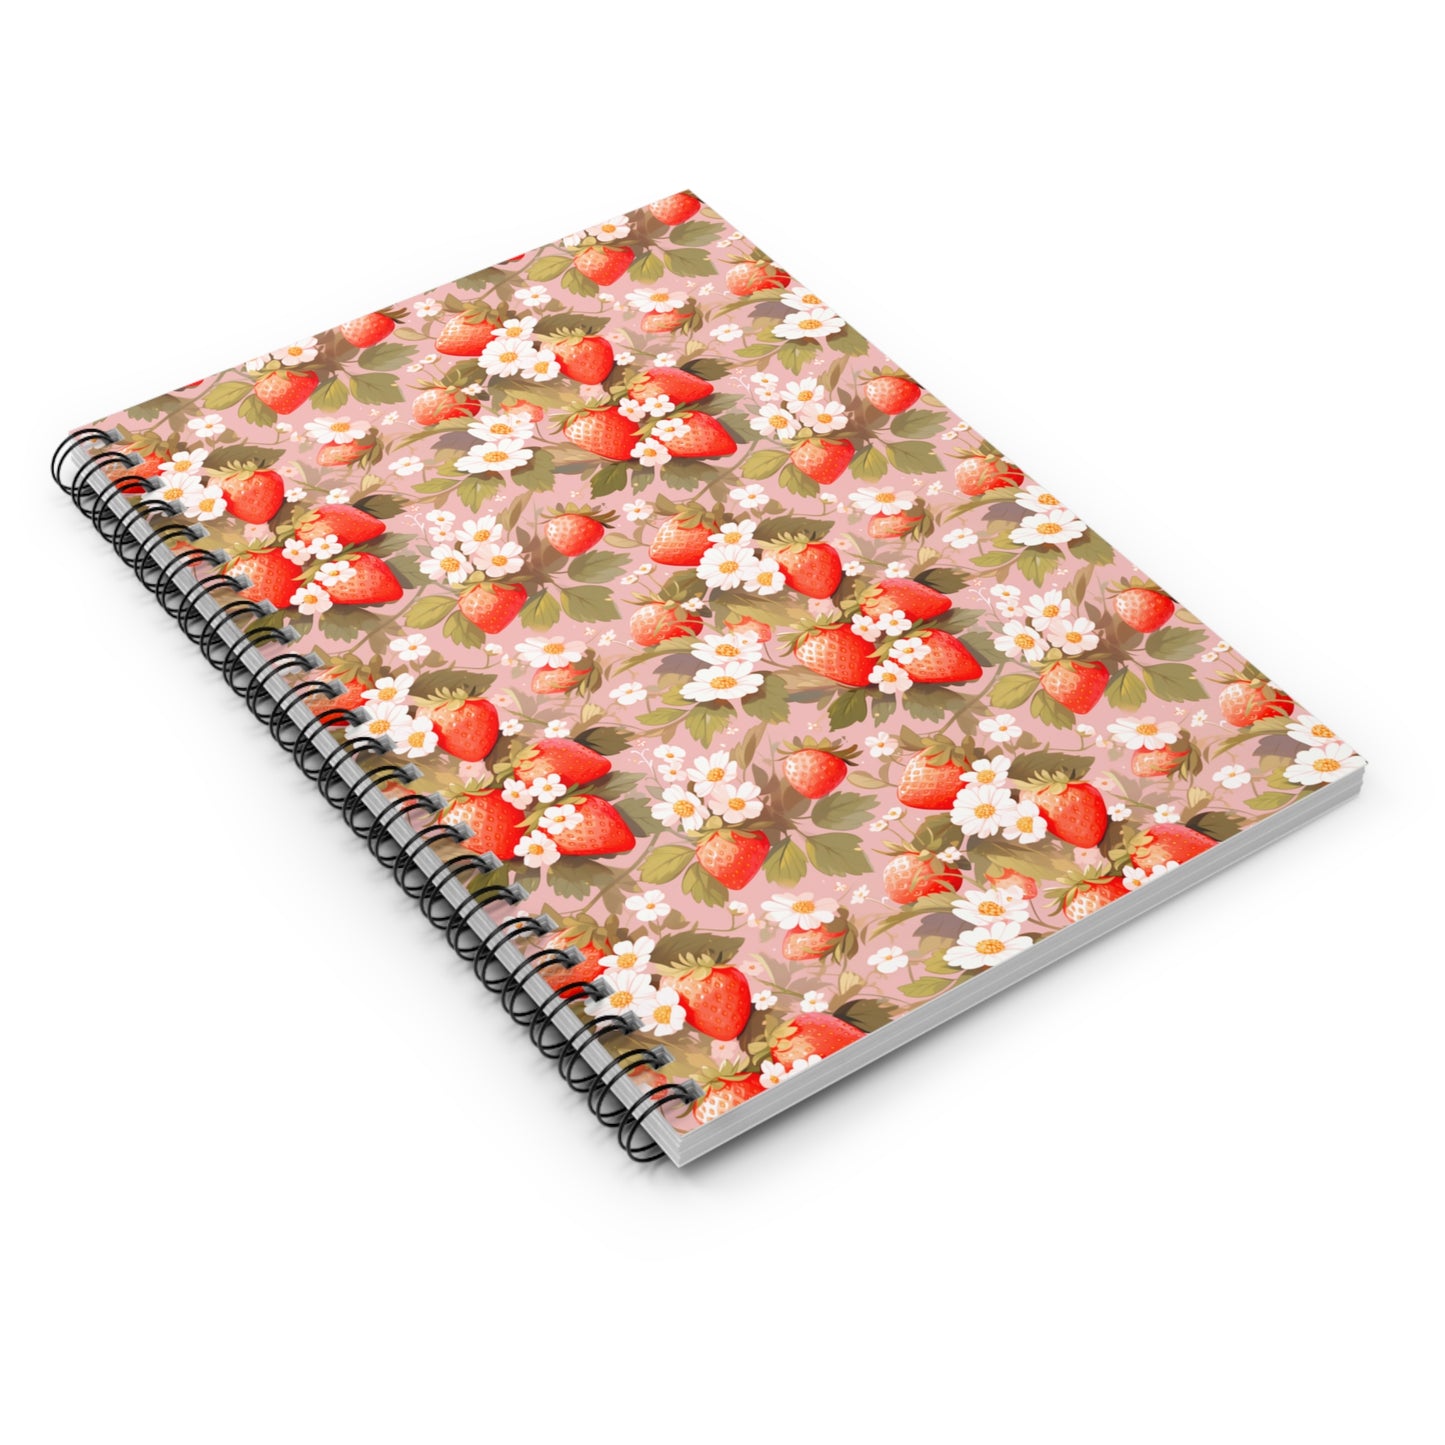 Symphony of Strawberries | Ruled Line Spiral Notebook